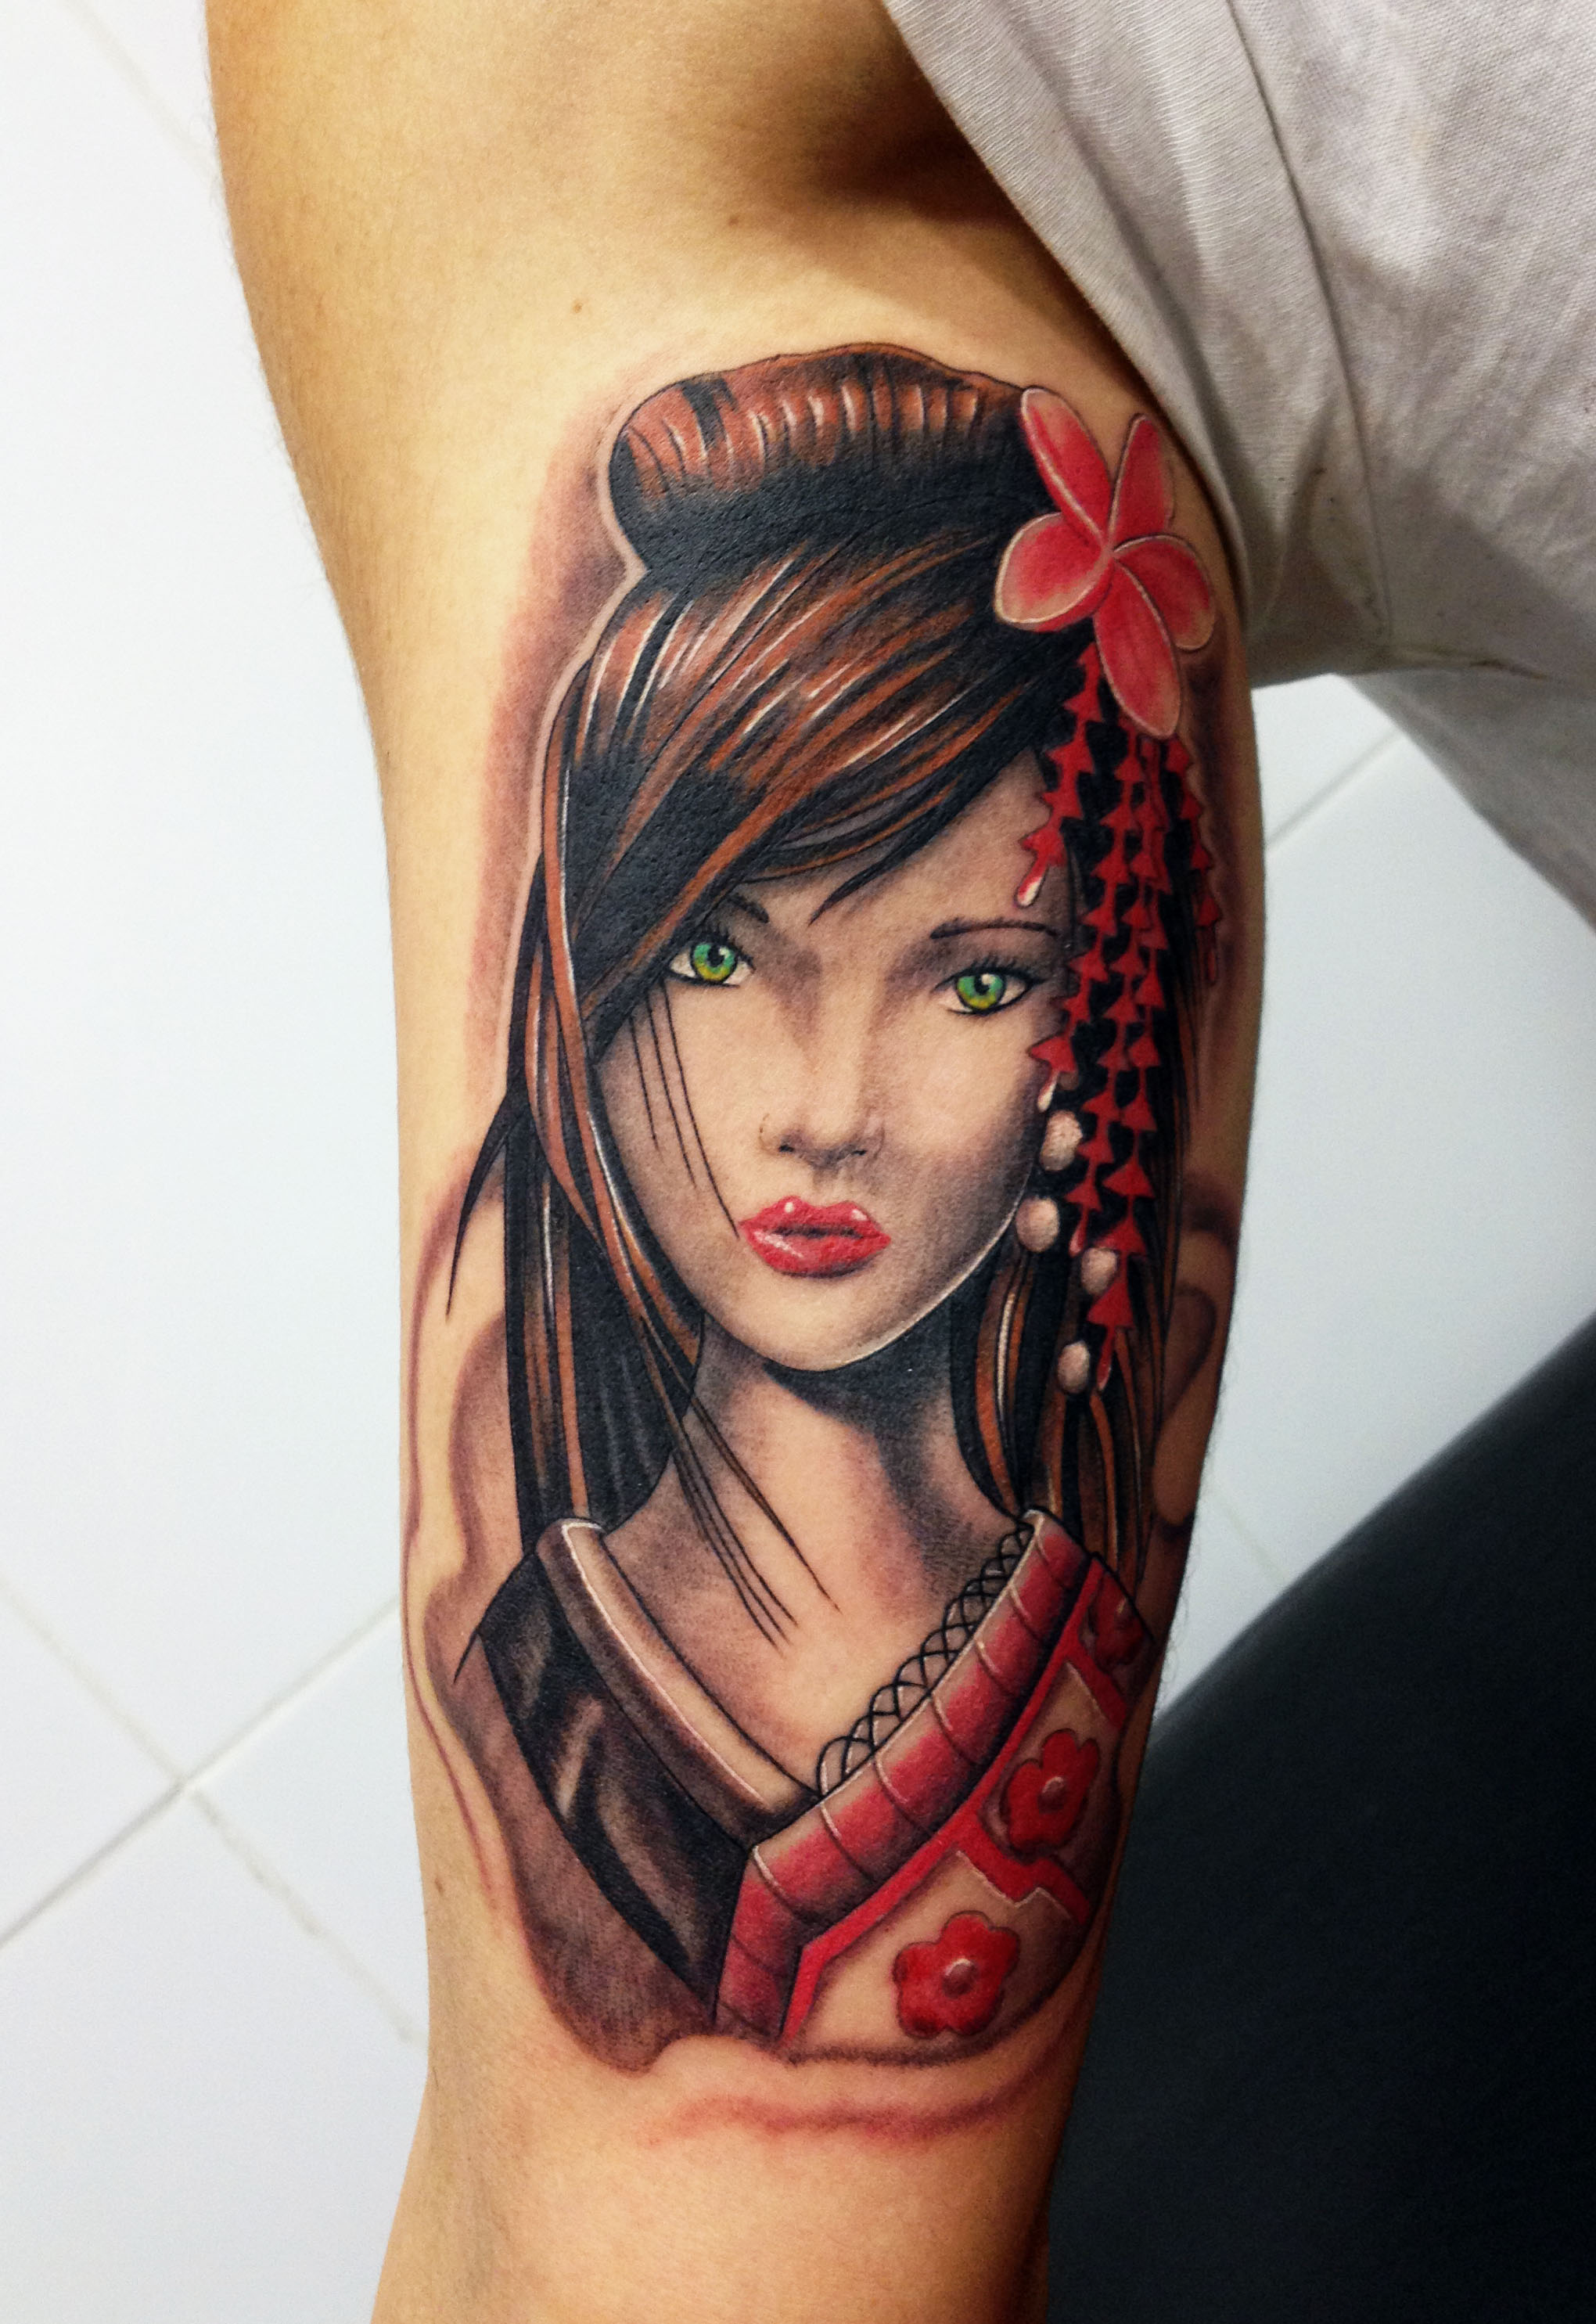 Japanese Geisha Tattoos Ideas And Meanings SWEETS ASIAN GIRL